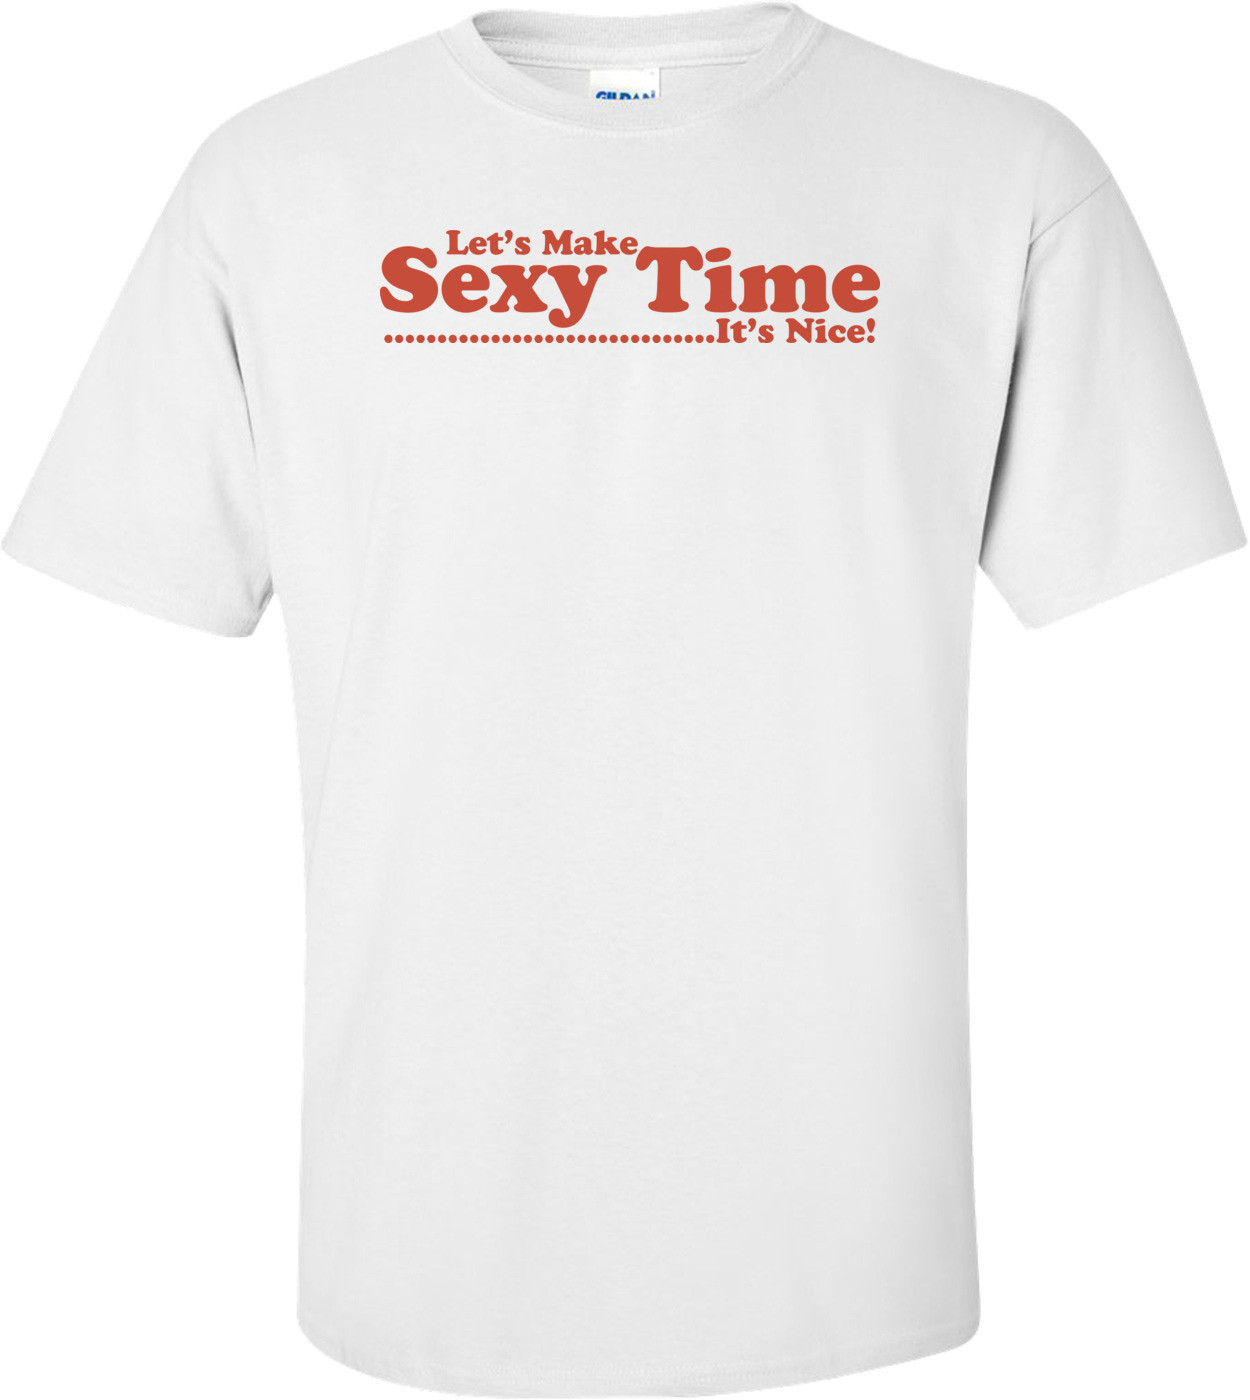 Let's Make Sexy Time It's Nice T-shirt 